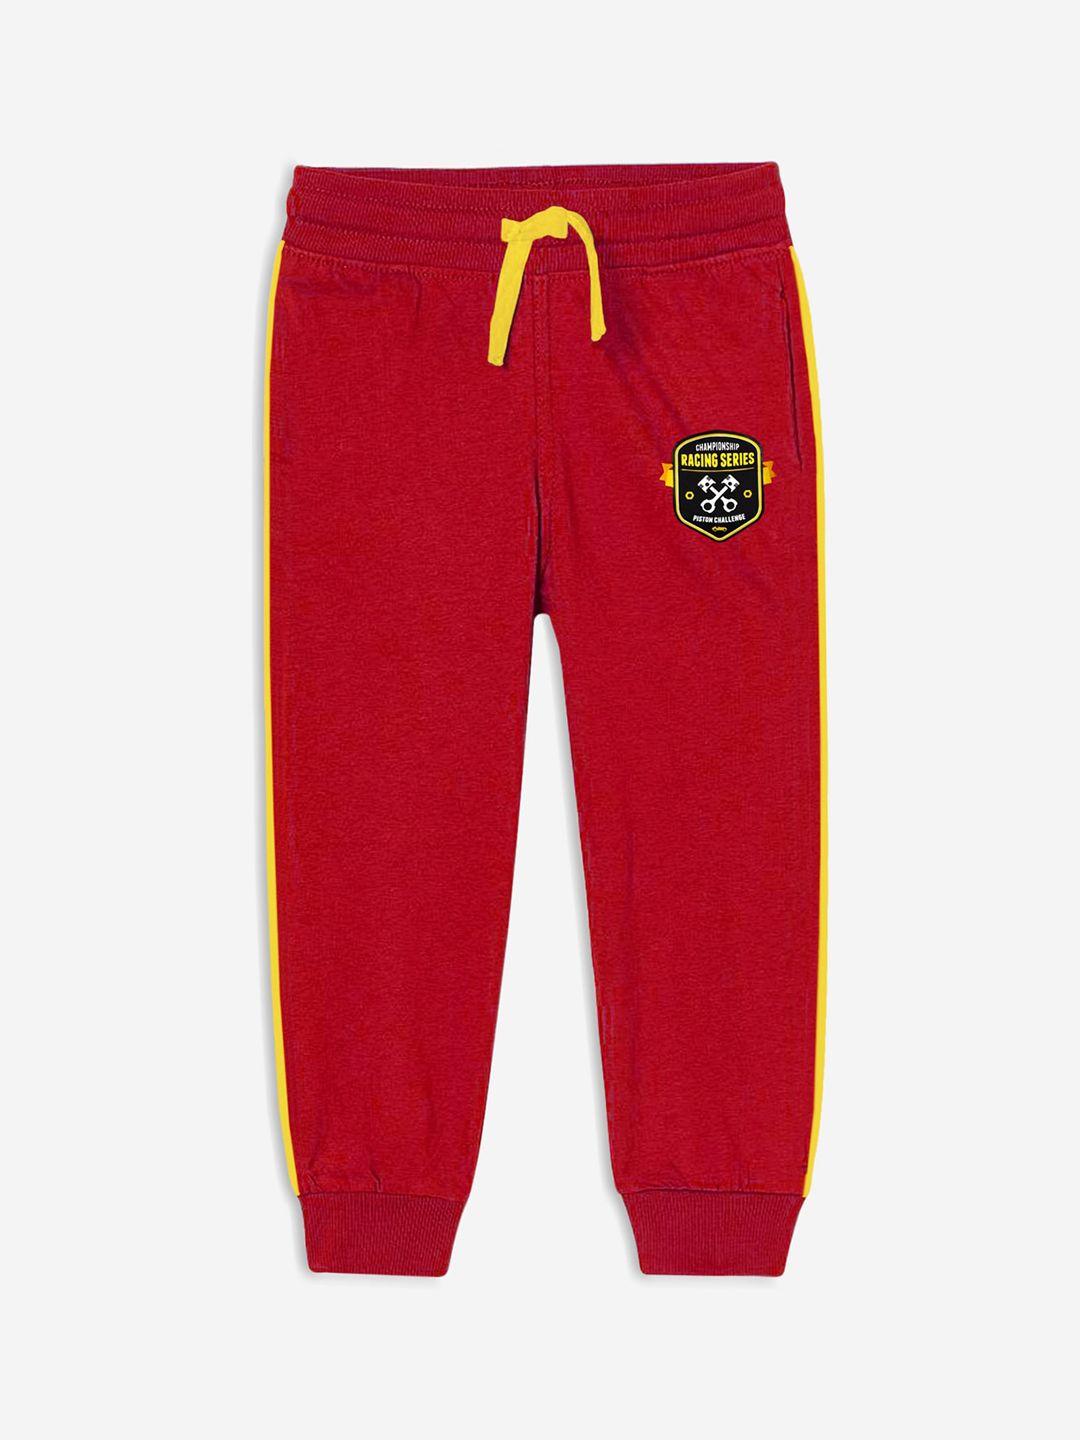 miss-&-chief-boys-red-solid-pure-cotton-track-pants